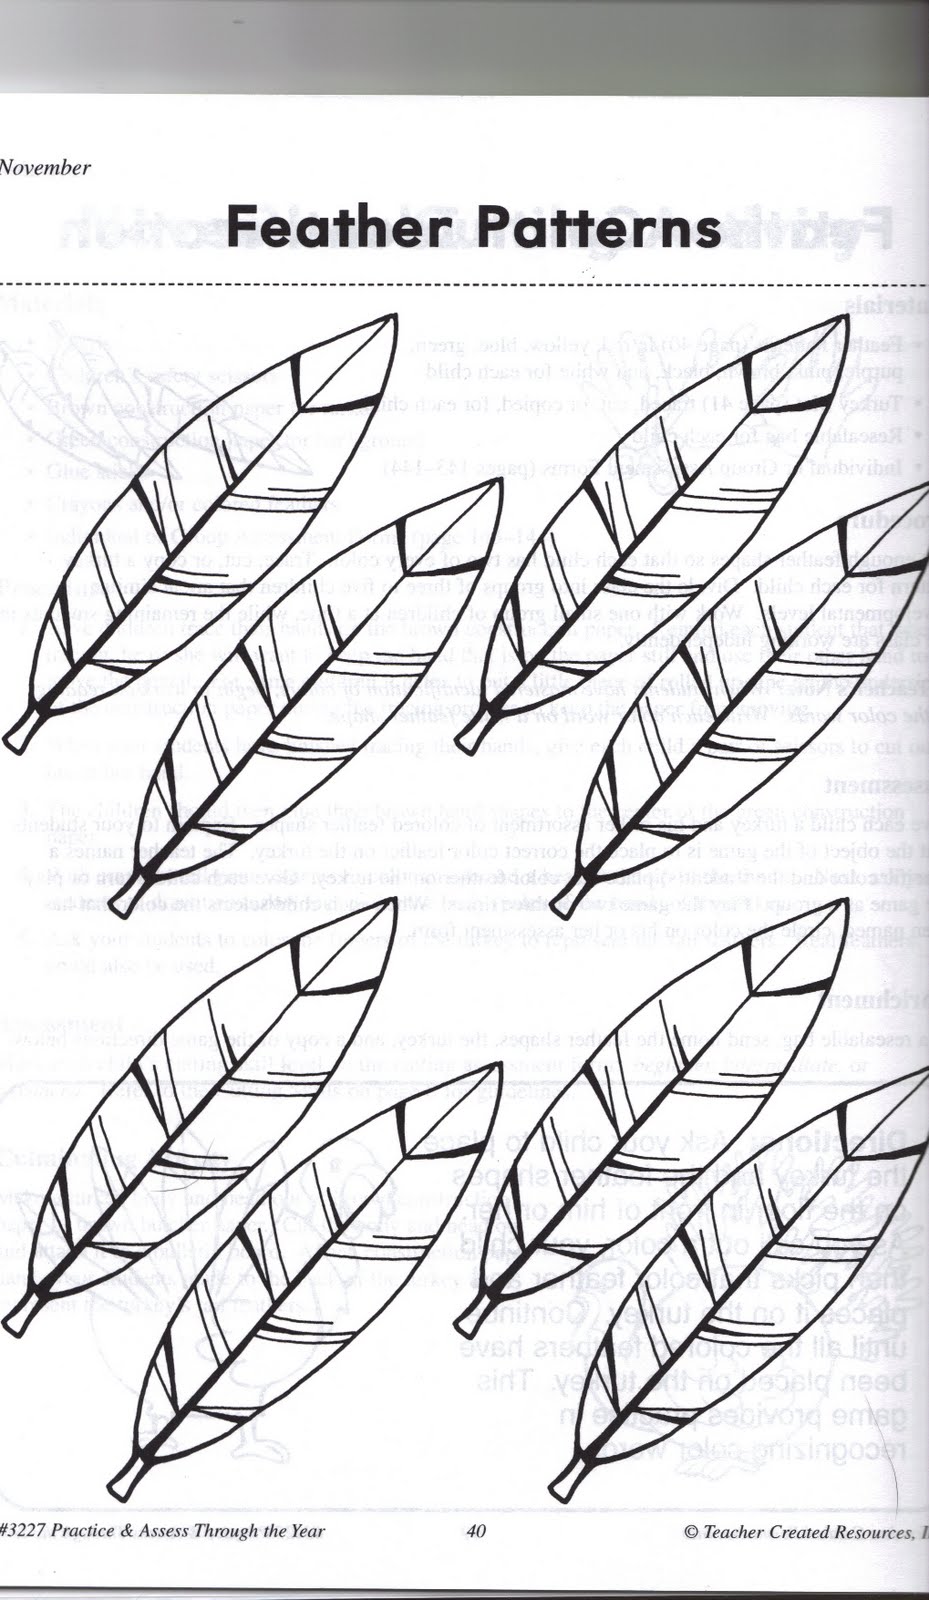 4 Best Images of Feather Pattern Printable Free Printable Feather